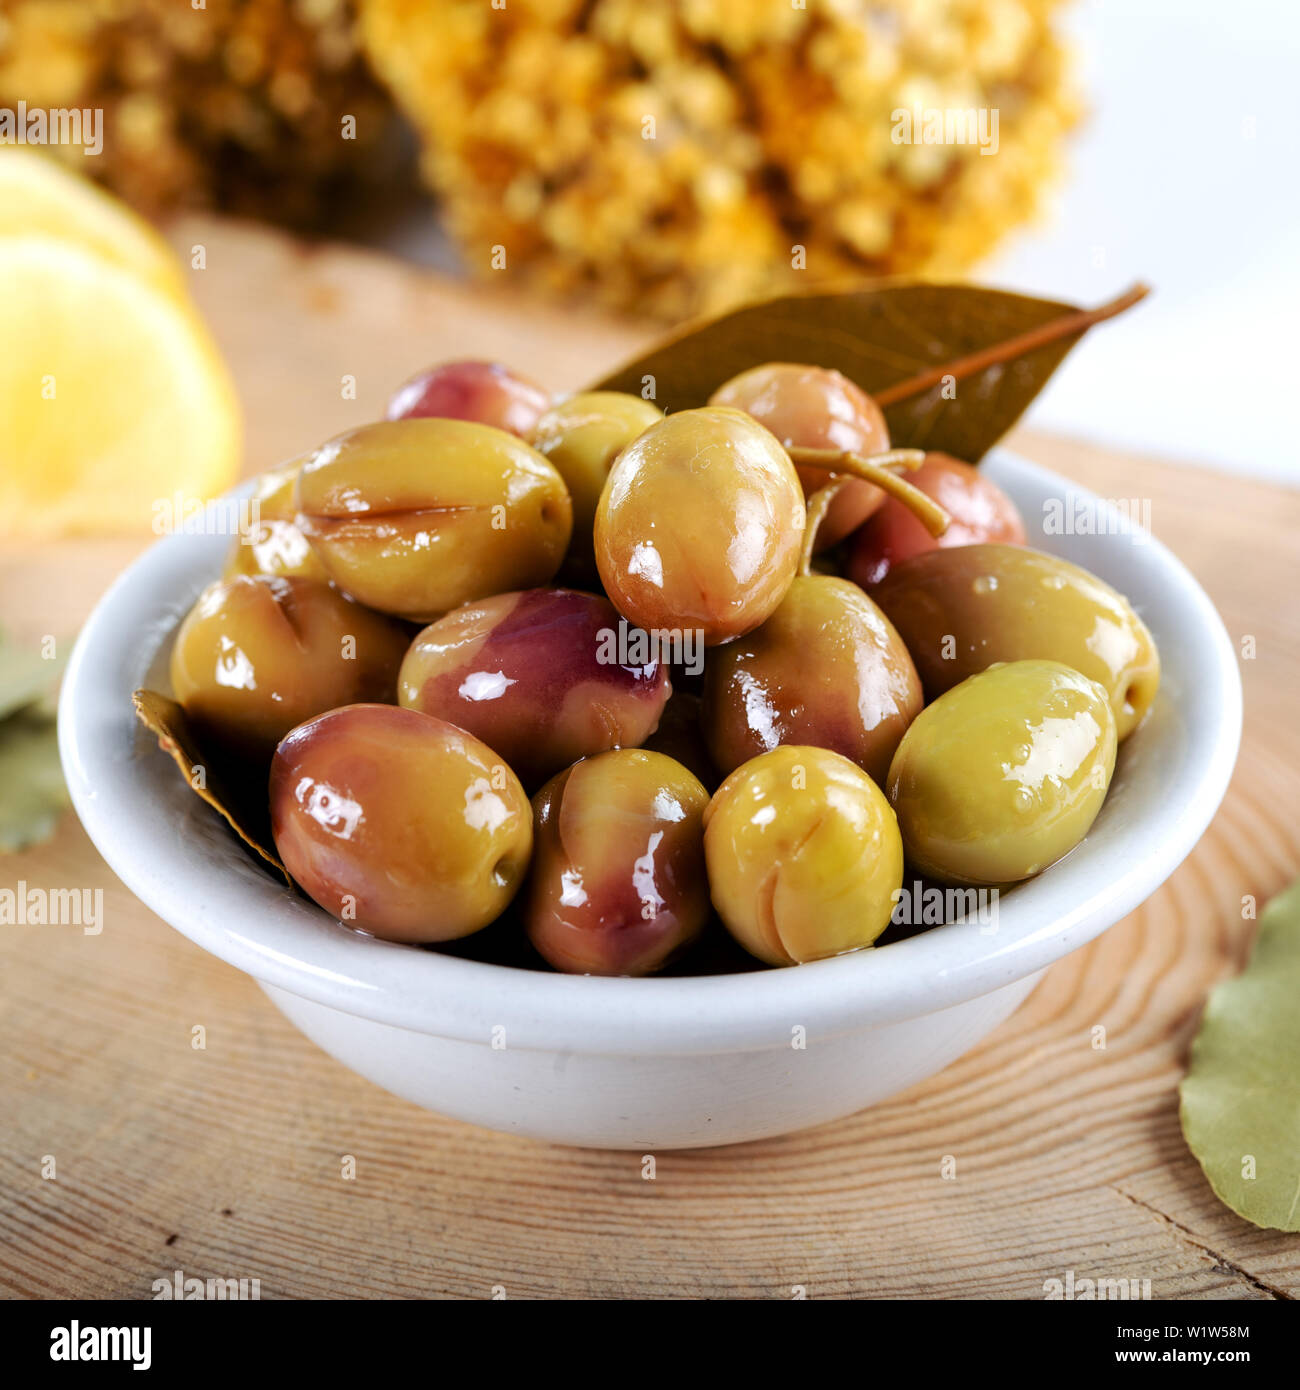 Green olives in bowl with lemons and daphne leaves. Stock Photo